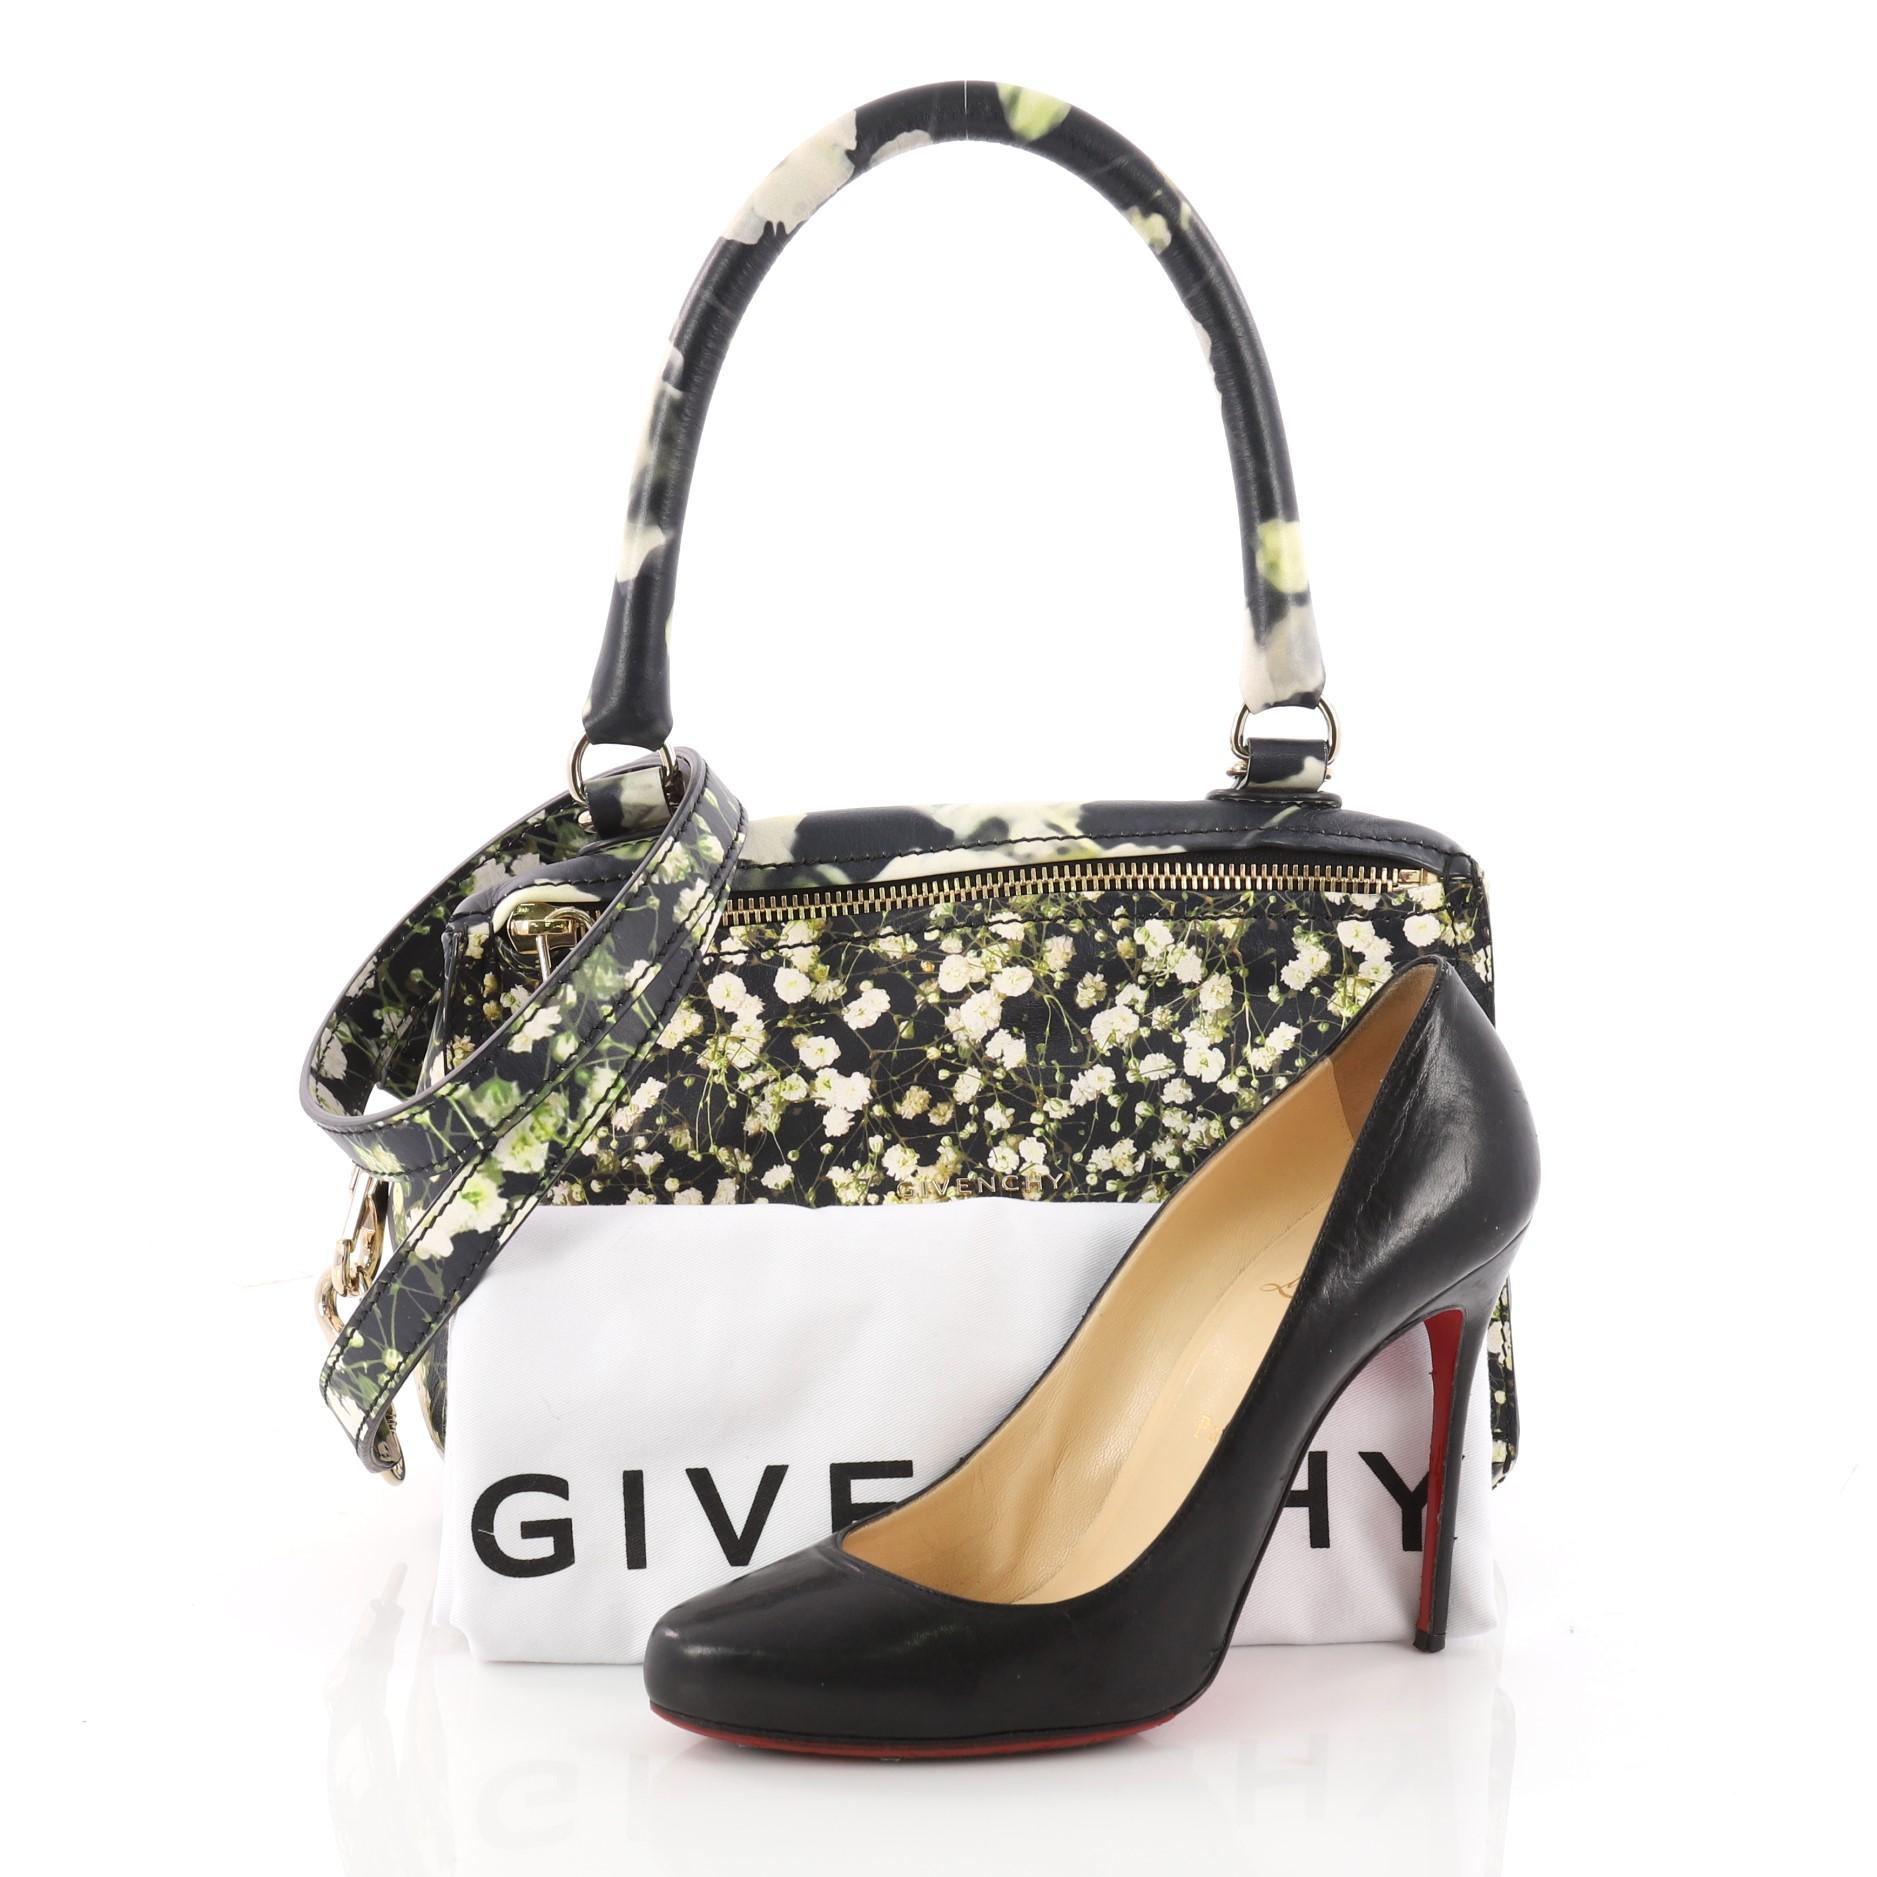 This authentic Givenchy Pandora Bag Printed Leather Small is the perfect companion bag for any on-the-go fashionista. Crafted from floral printed leather, this edgy and cult-favorite satchel features a pandora box-inspired silhouette, a singular top